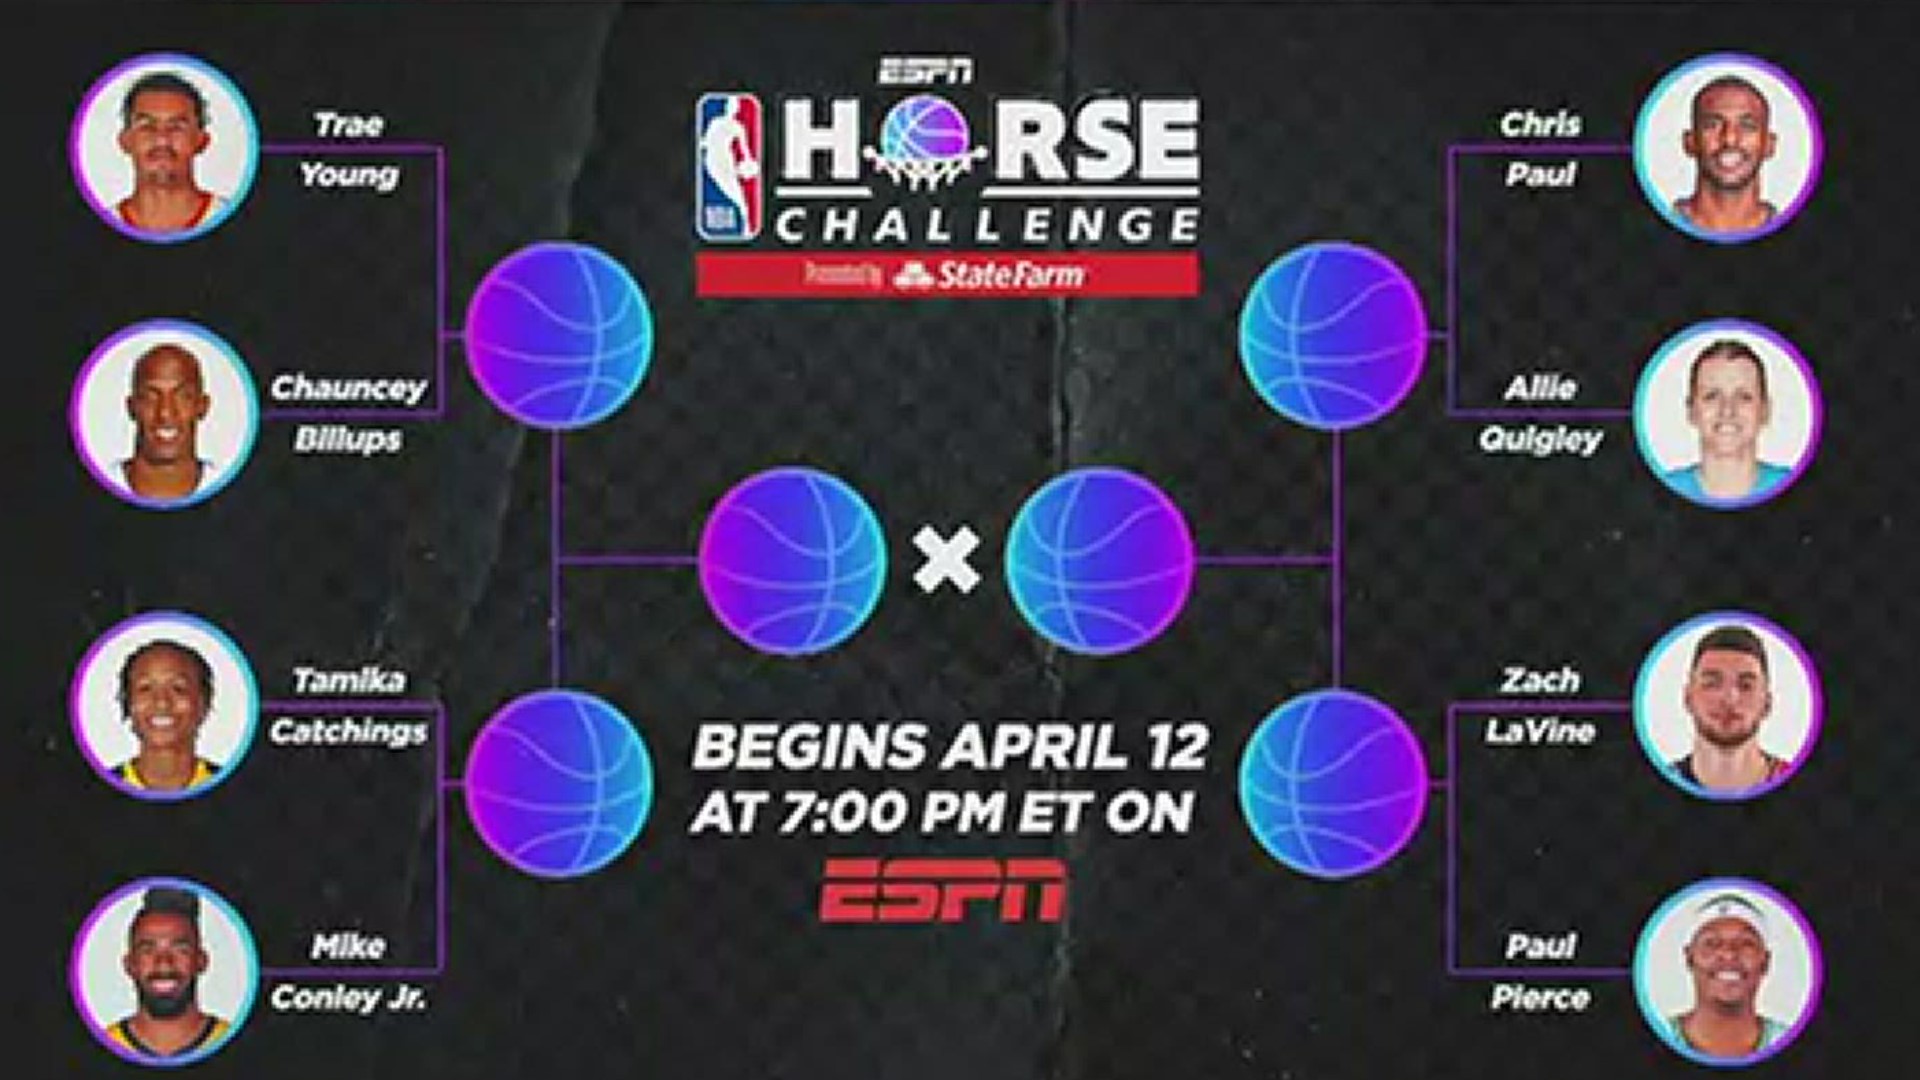 The NBA announced that eight NBA and WNBA players and legends will participate in a televised HORSE Challenge.